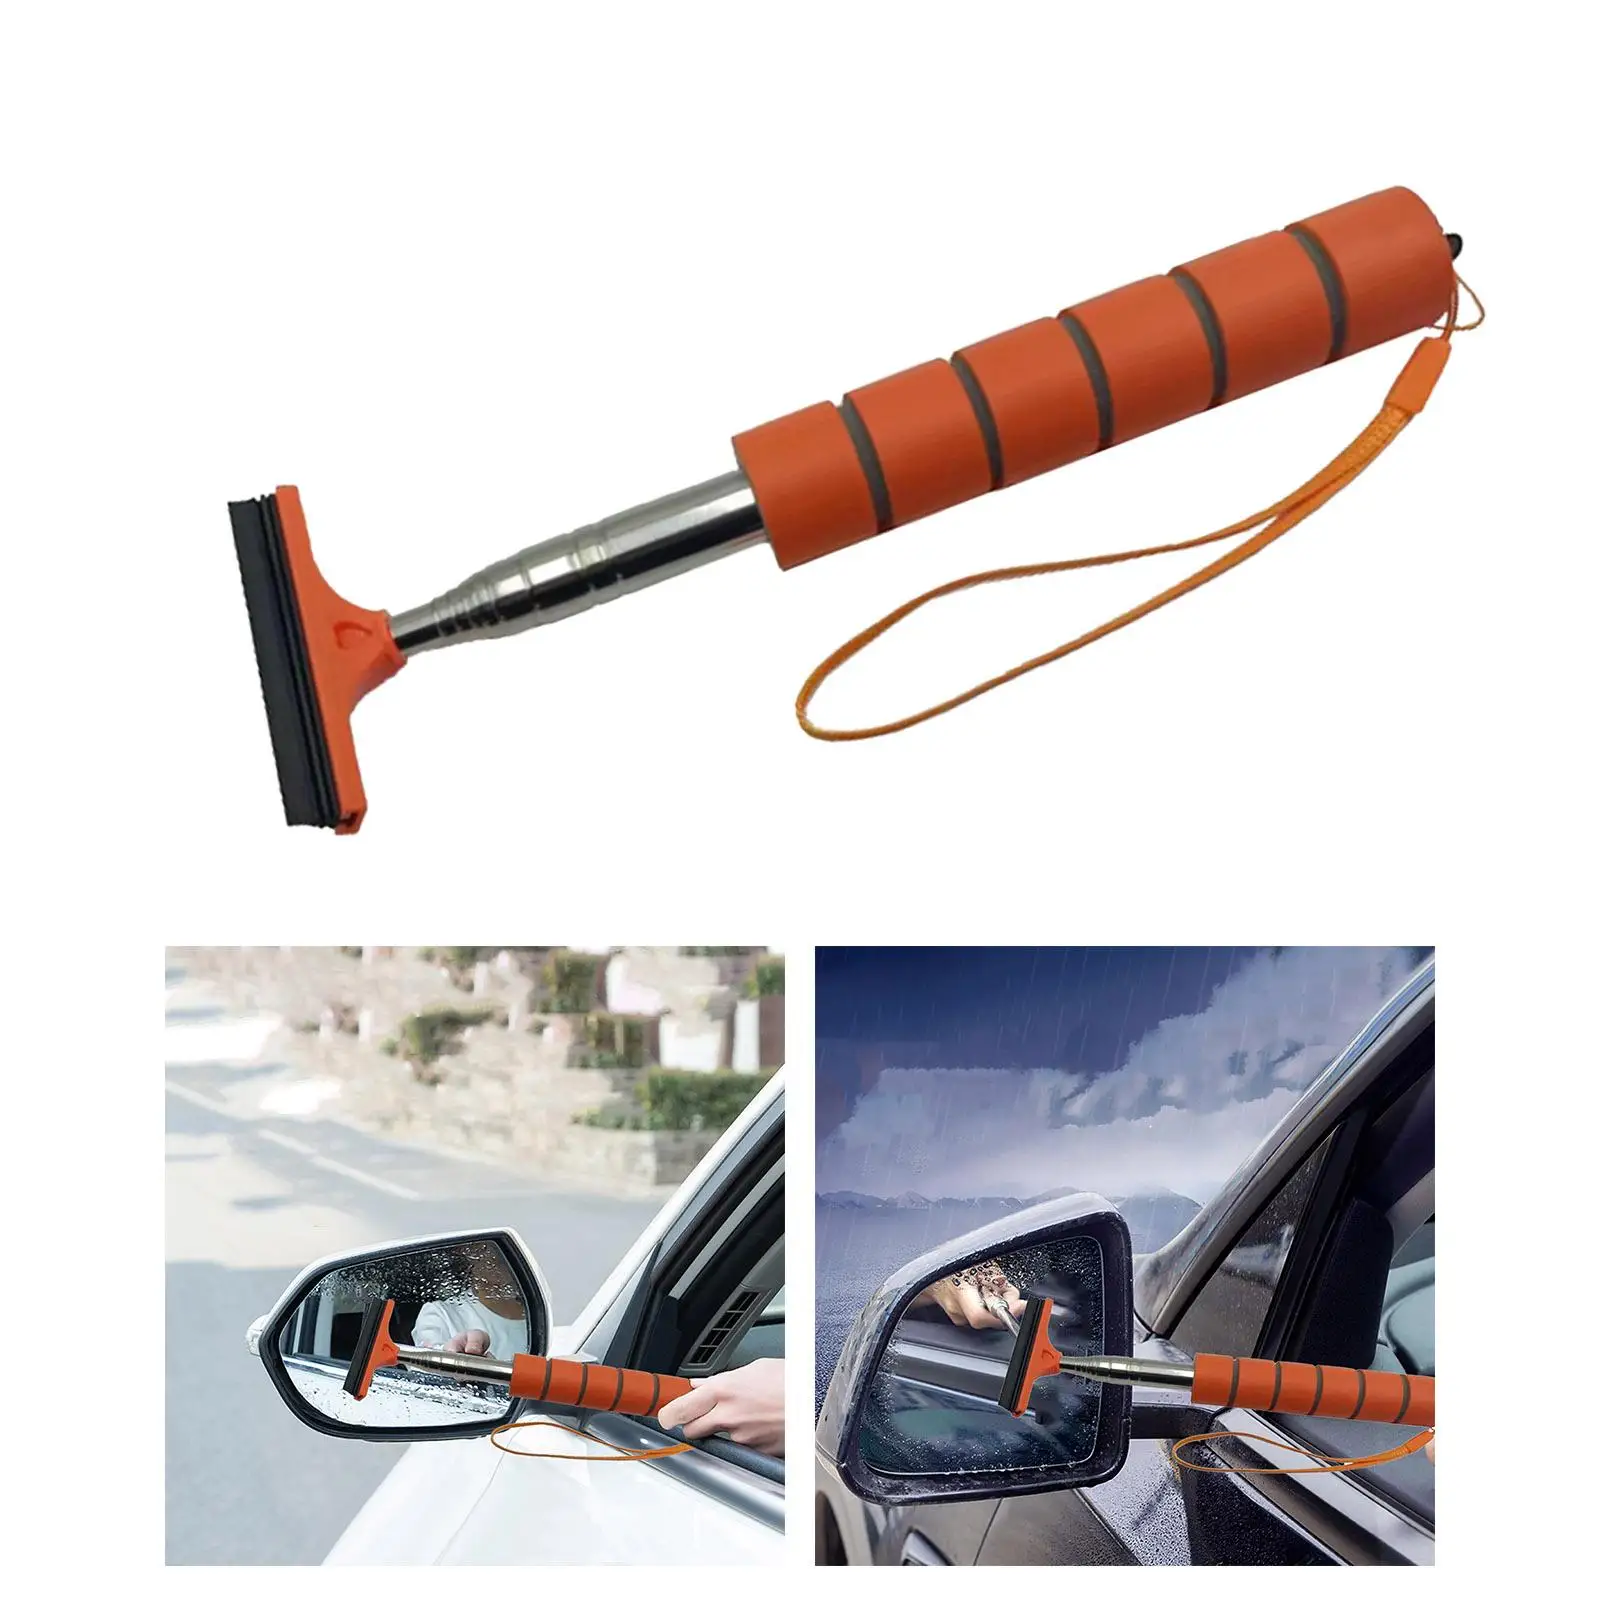 Car Rearview Mirror Wiper Automotive Accessories Vehicle Glass Cleaner Tool